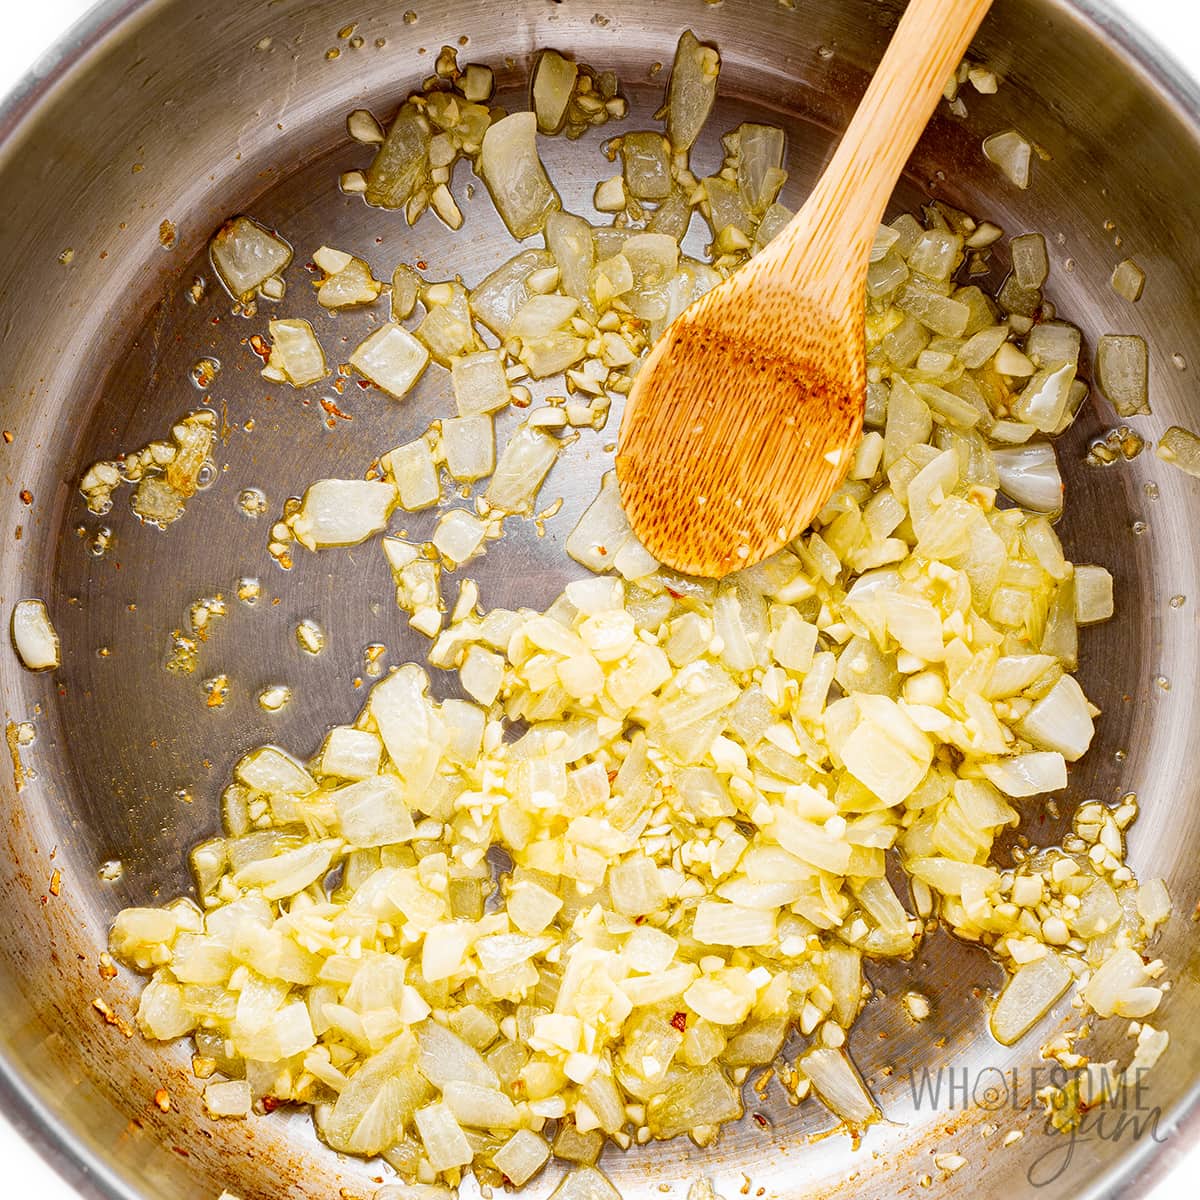 Sauteed onions and garlic in a skillet.